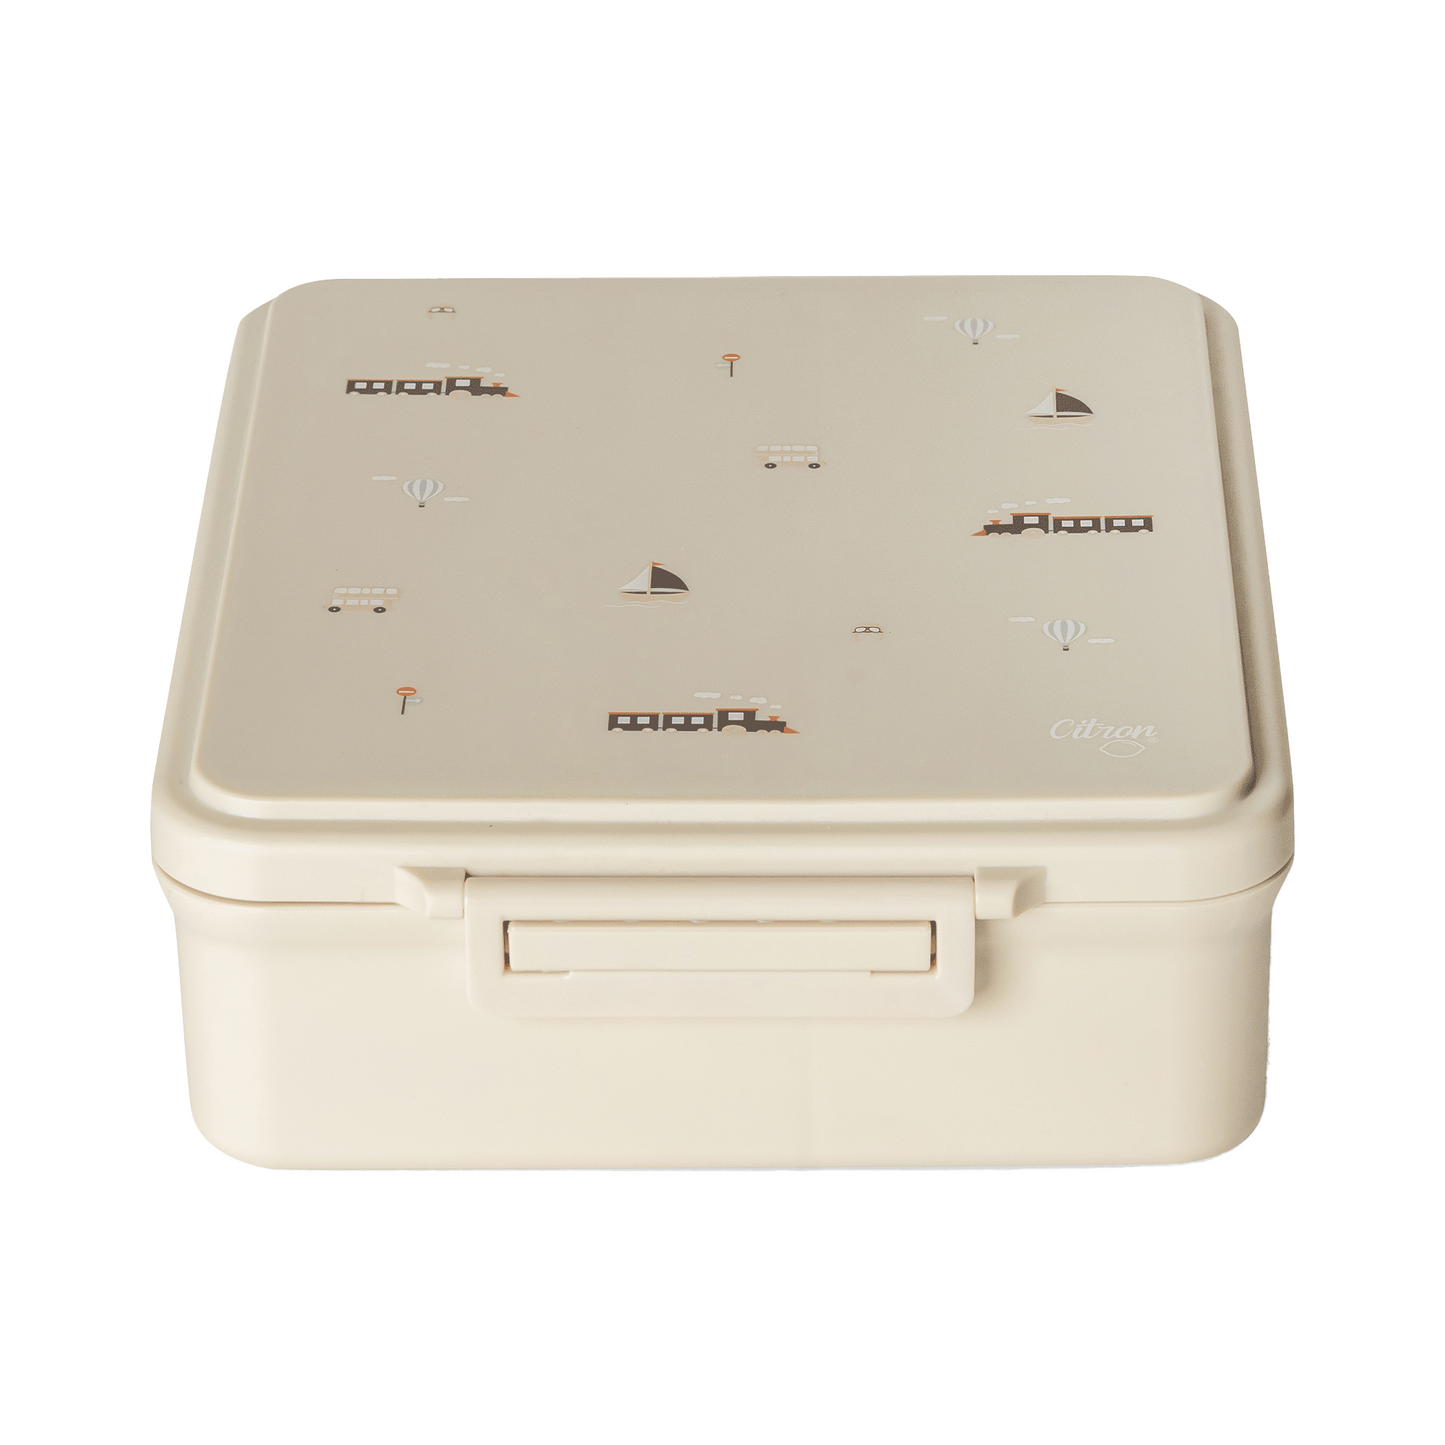 Grand Lunch Box - 4 Compartments - Vehicles + Food Jar